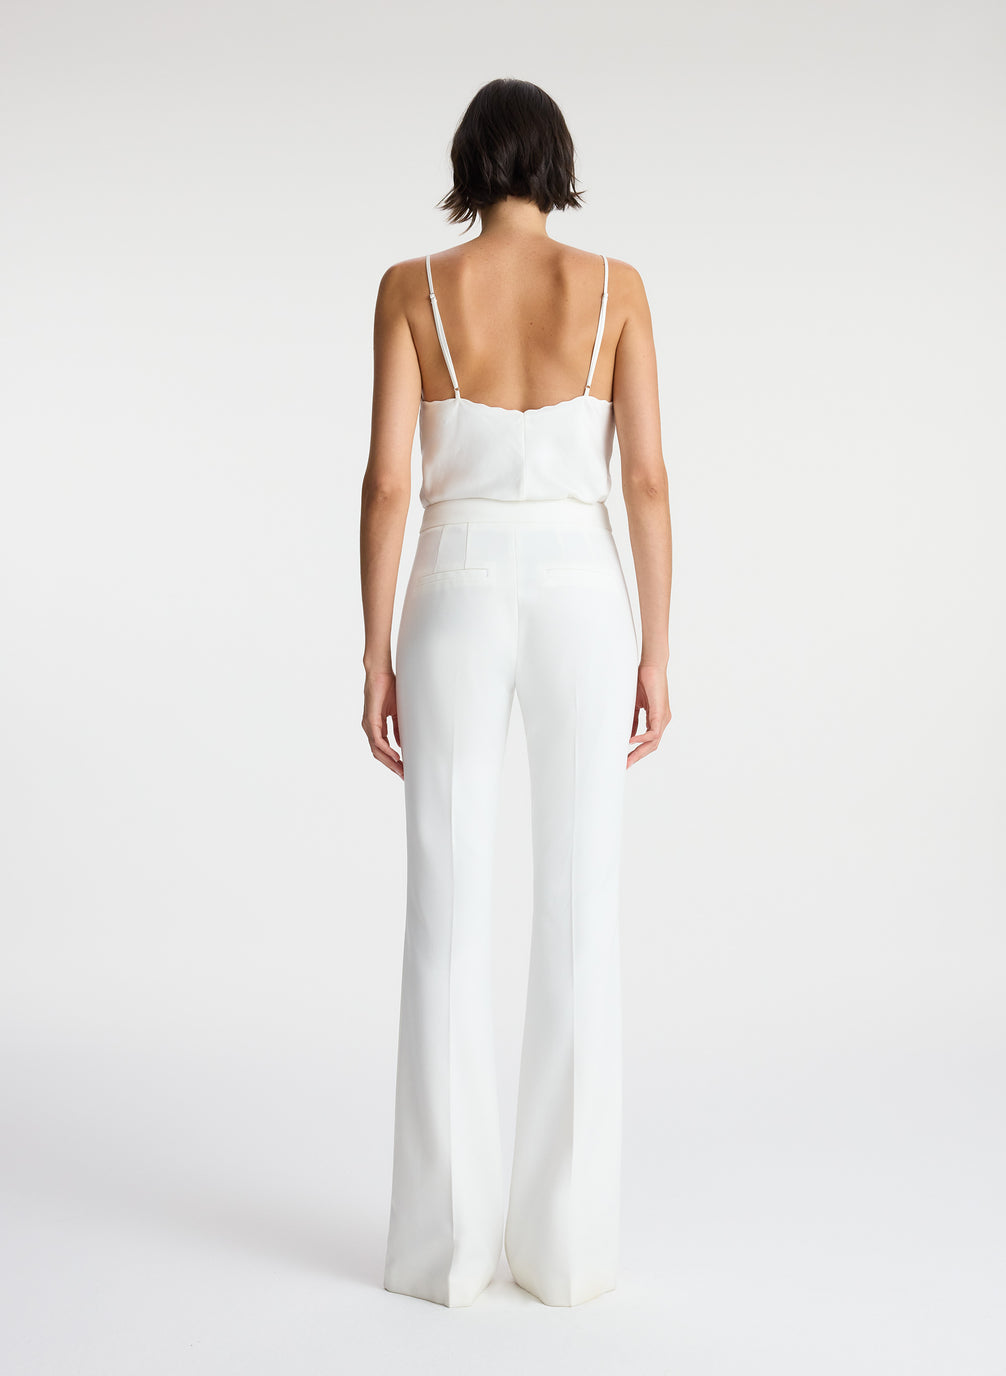 back view of woman wearing white satin camisole and white flared tuxedo pants